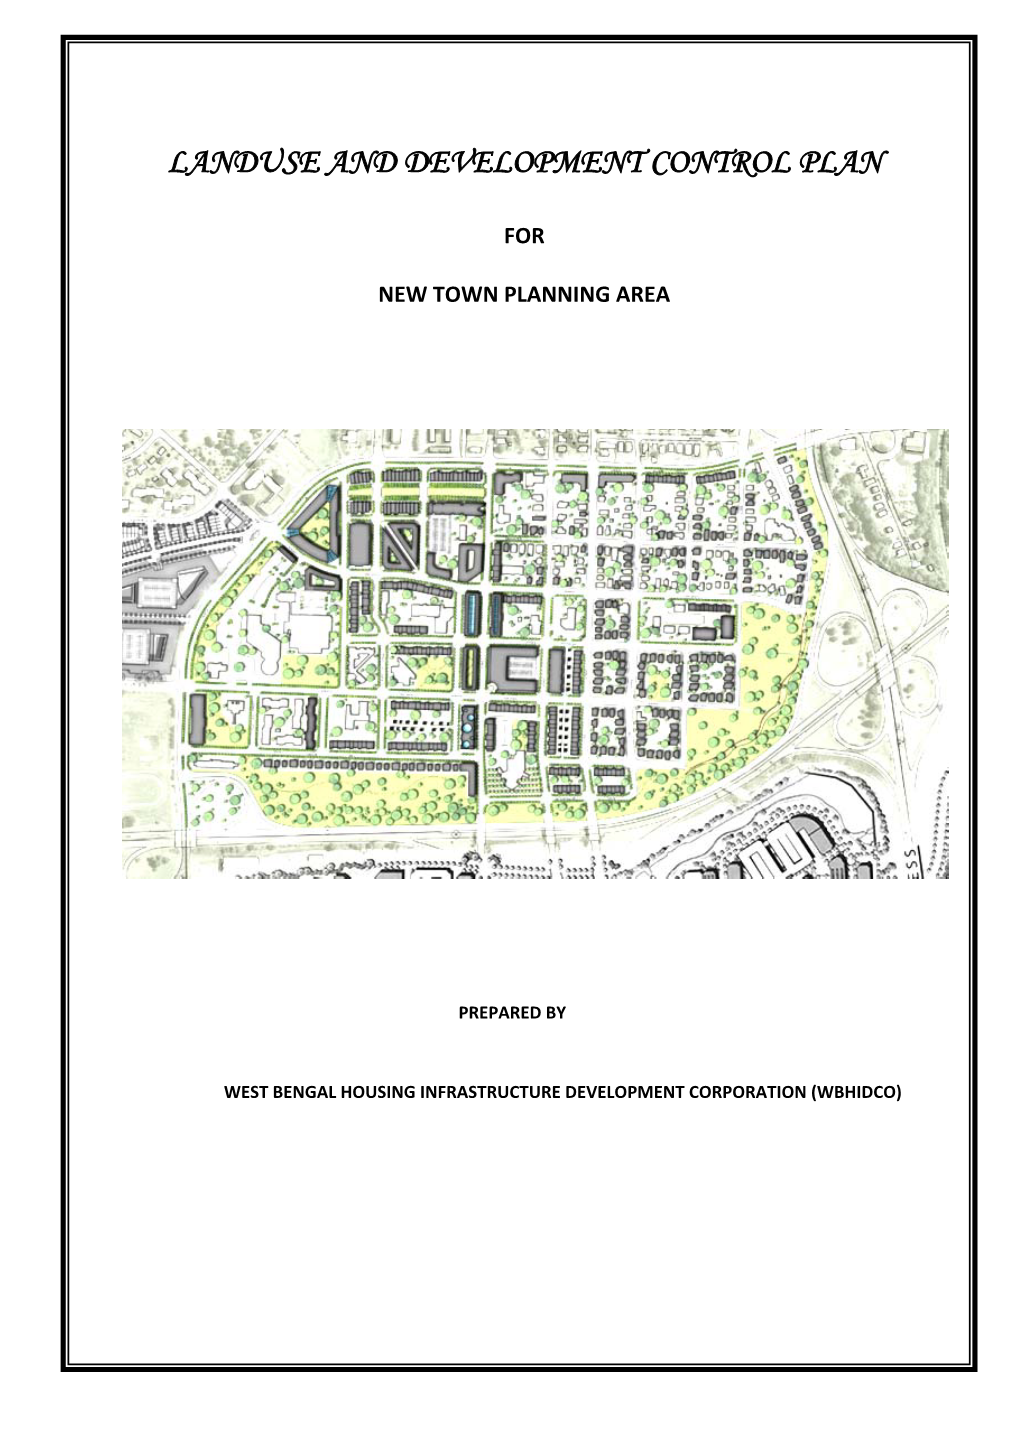 (Land Use & Development Control Plan) Report of New Town